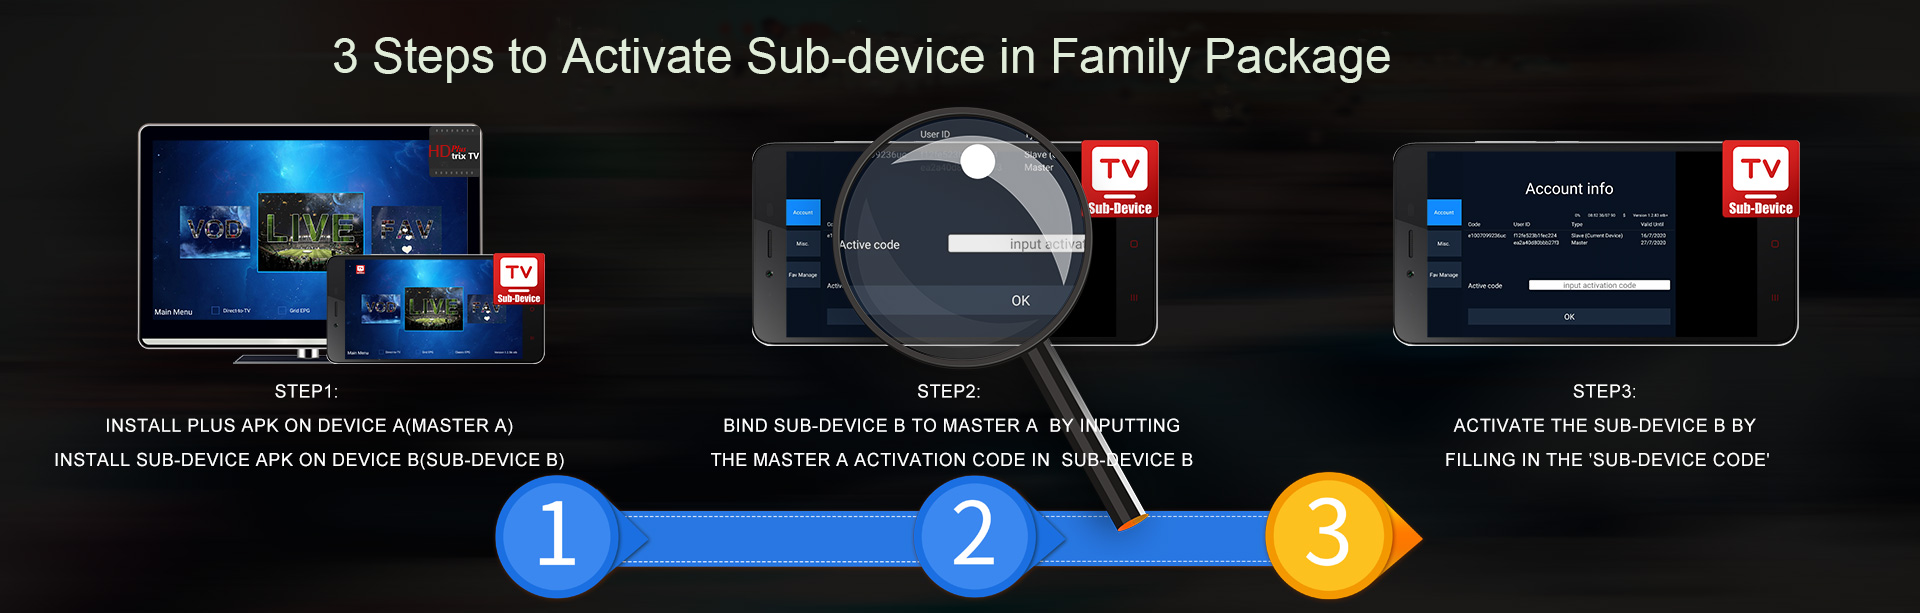 gtv hd plus family package